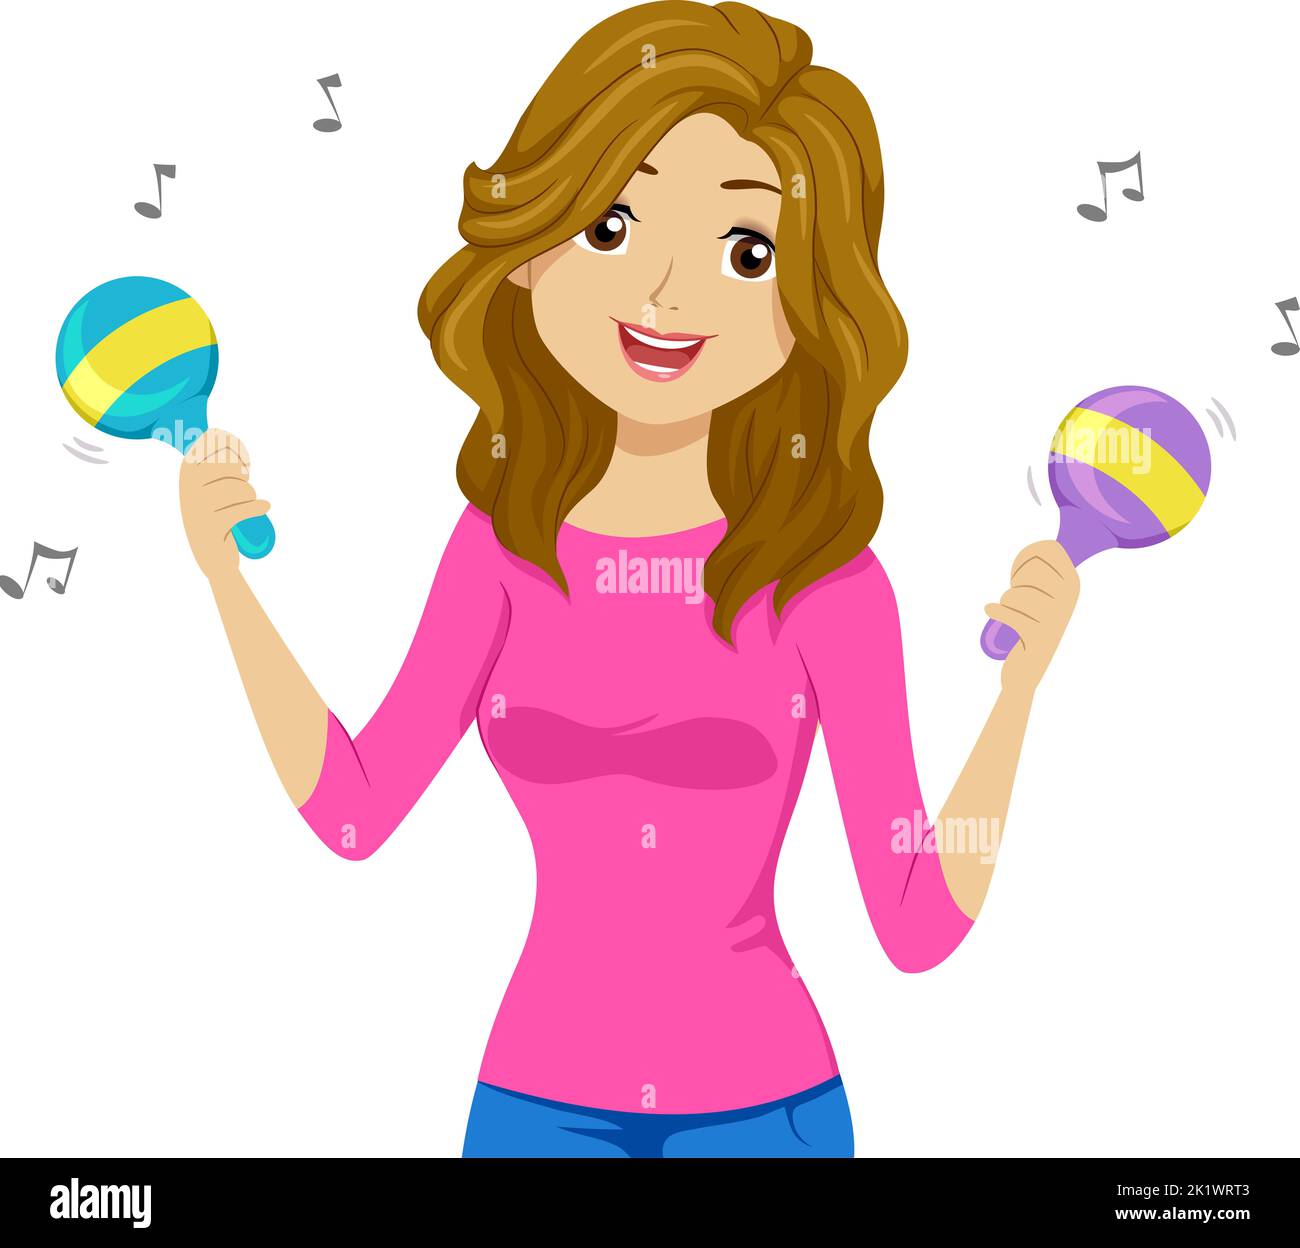 Illustration of Teen Girl Holding and Playing Maracas with Musical Notes Floating Around Stock Photo